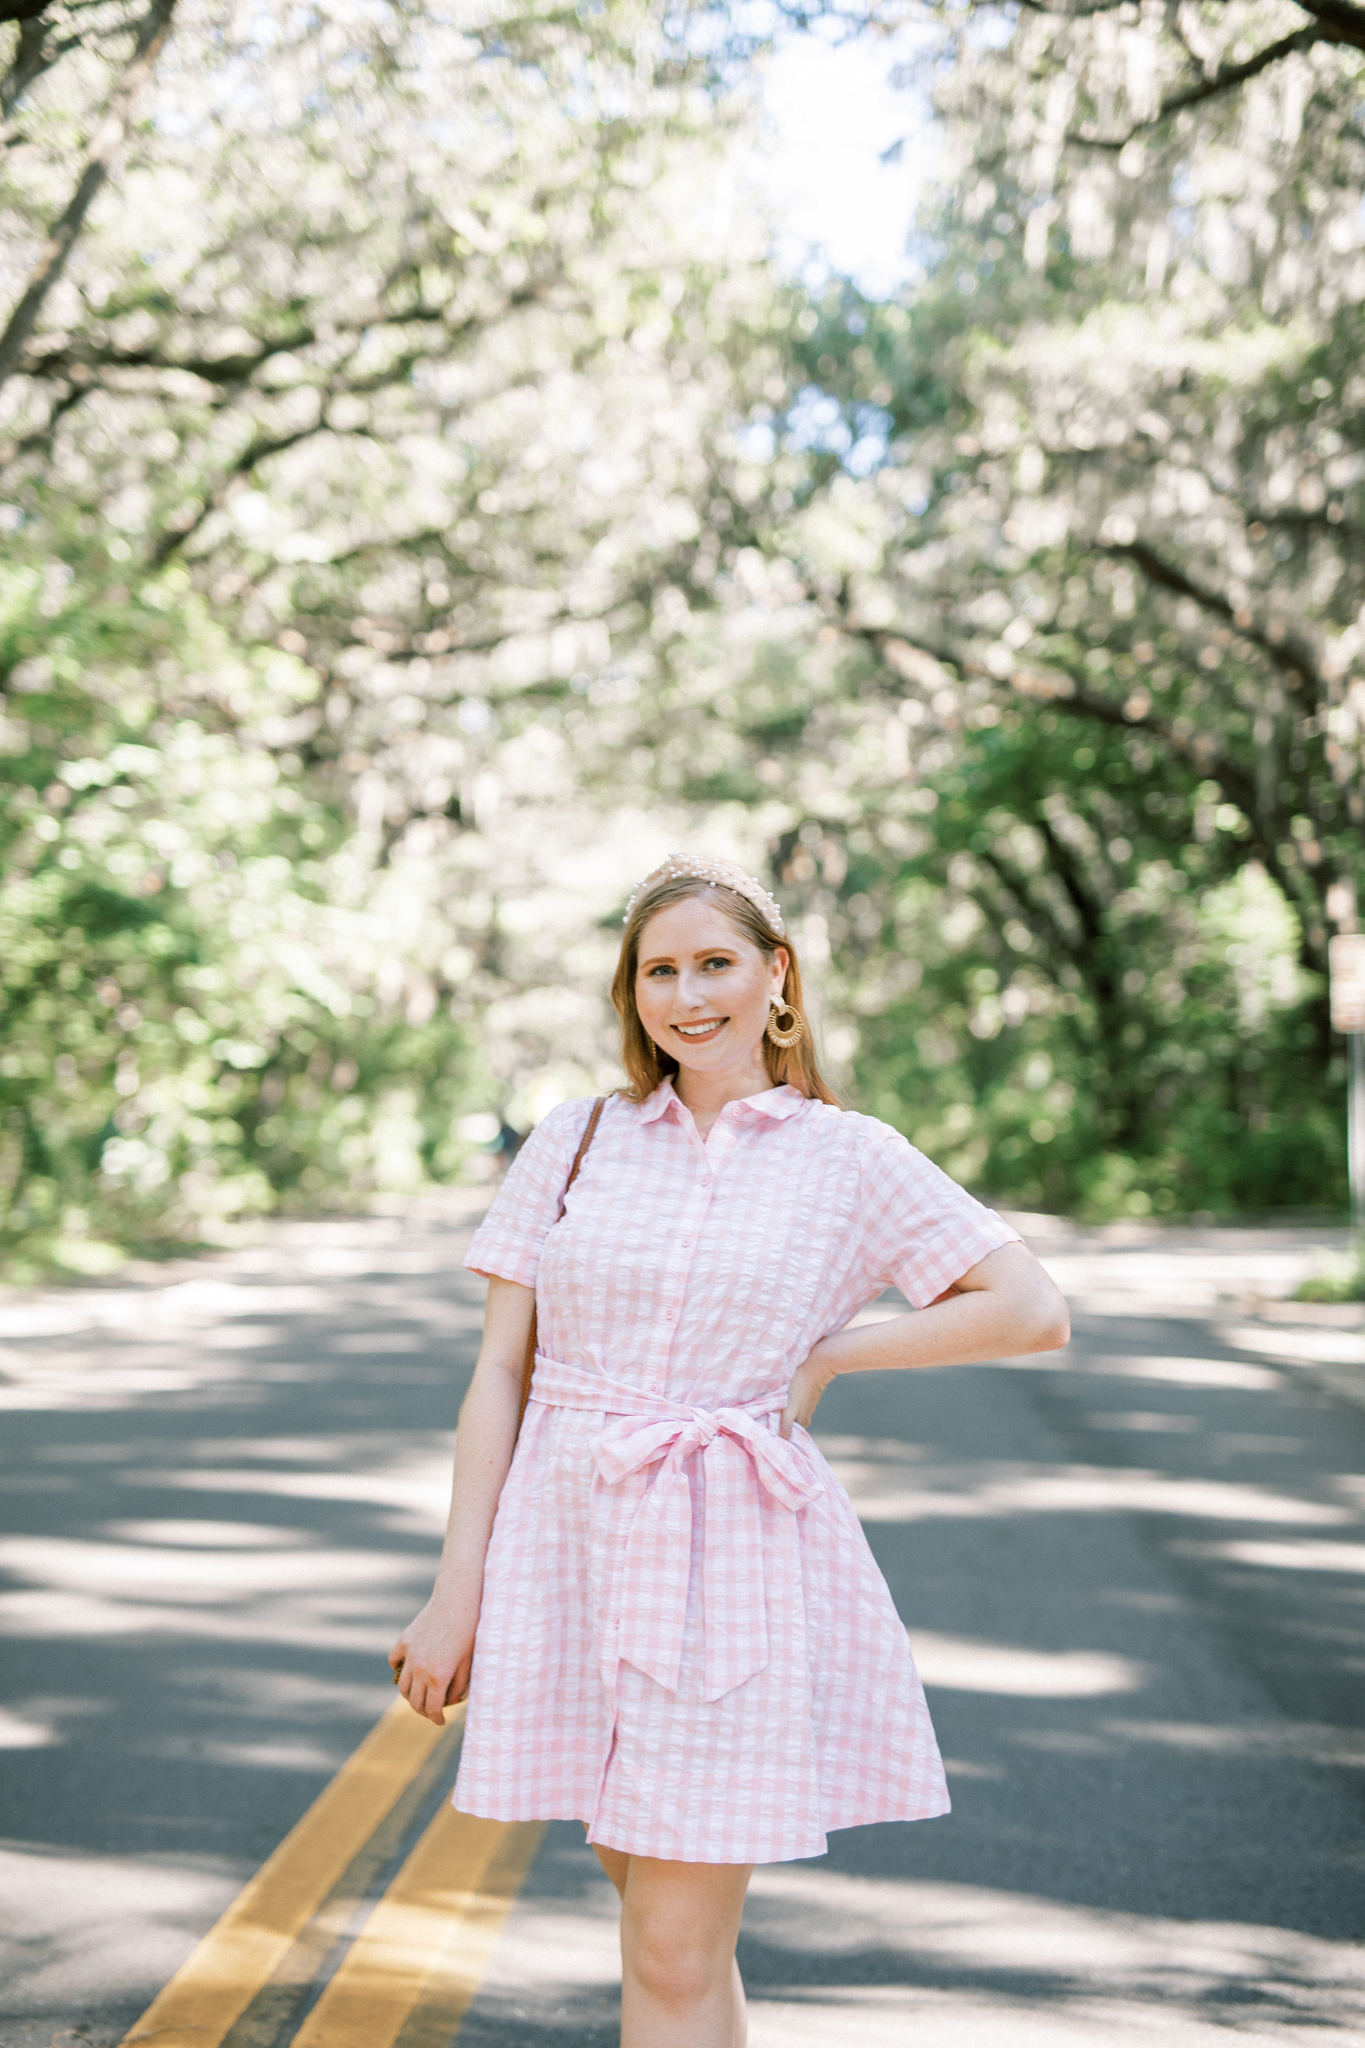 Affordable Gingham Shirtdress for Summer | Women's Gingham Button-Front Shirtdress - Lisa Marie Fernandez for Target and White Nike Sneakers | Affordable by Amanda, Florida Style Blogger 